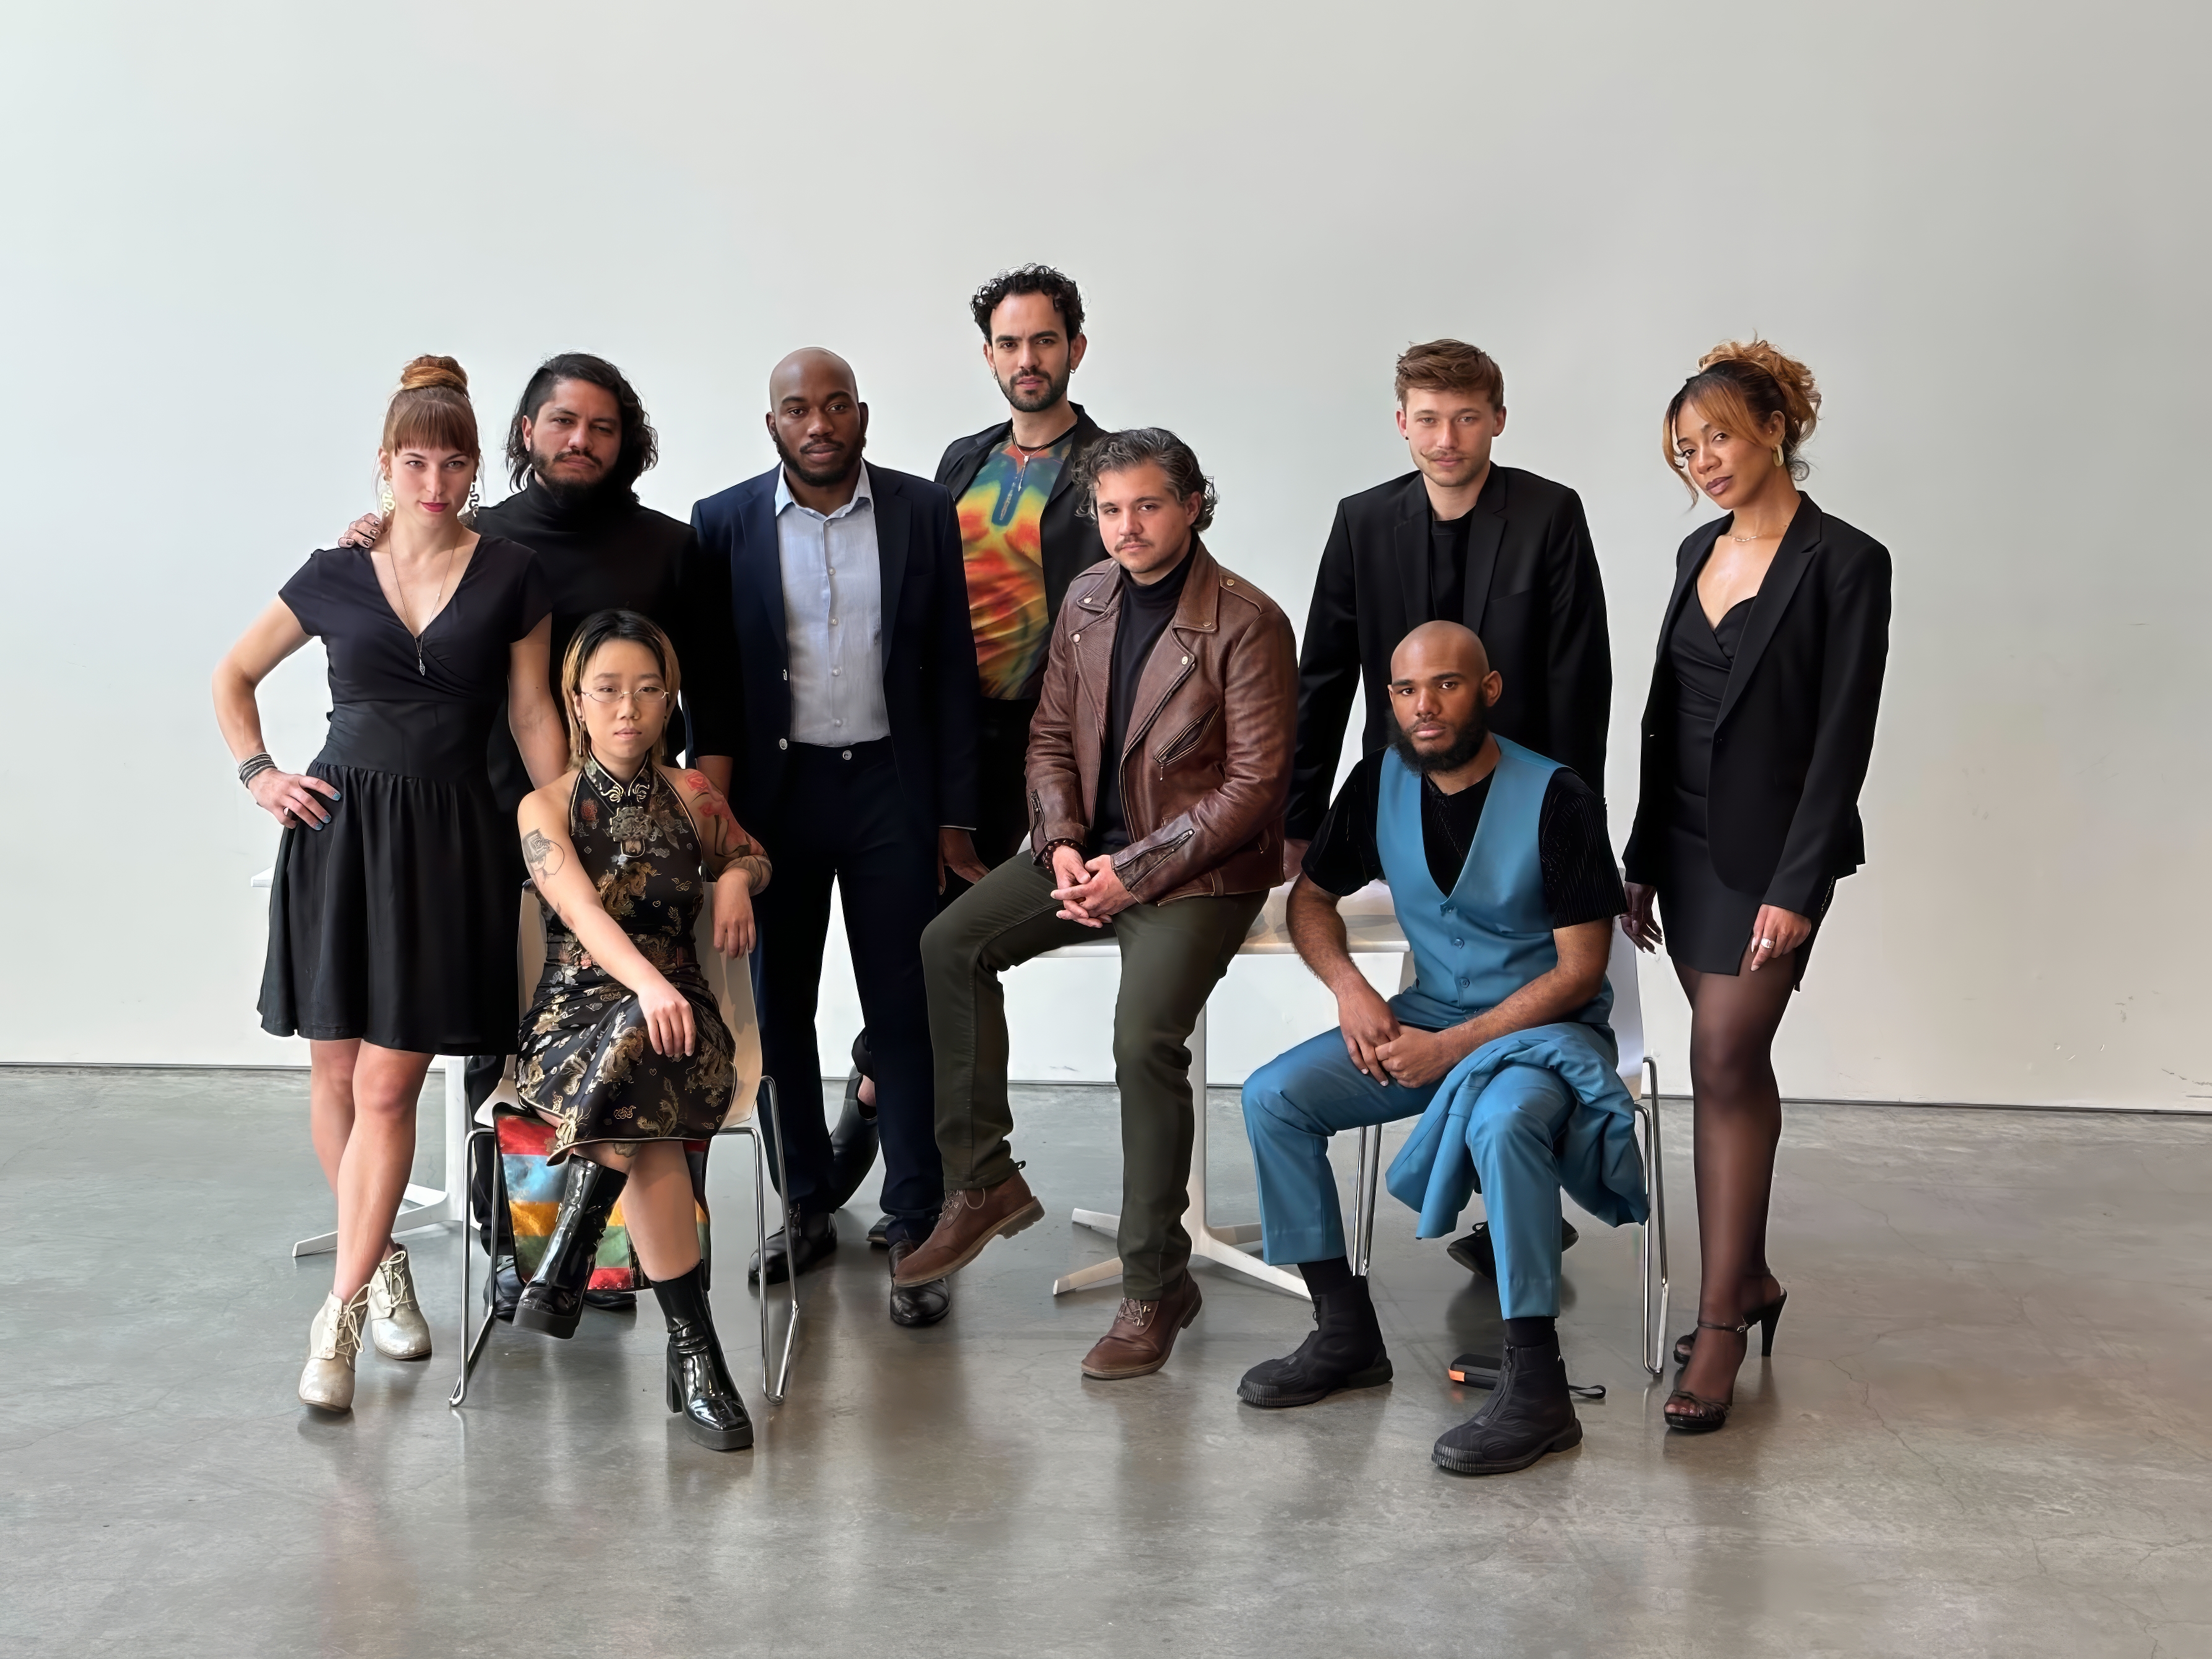 Color photo of the current cohort of film students, shot in a studio